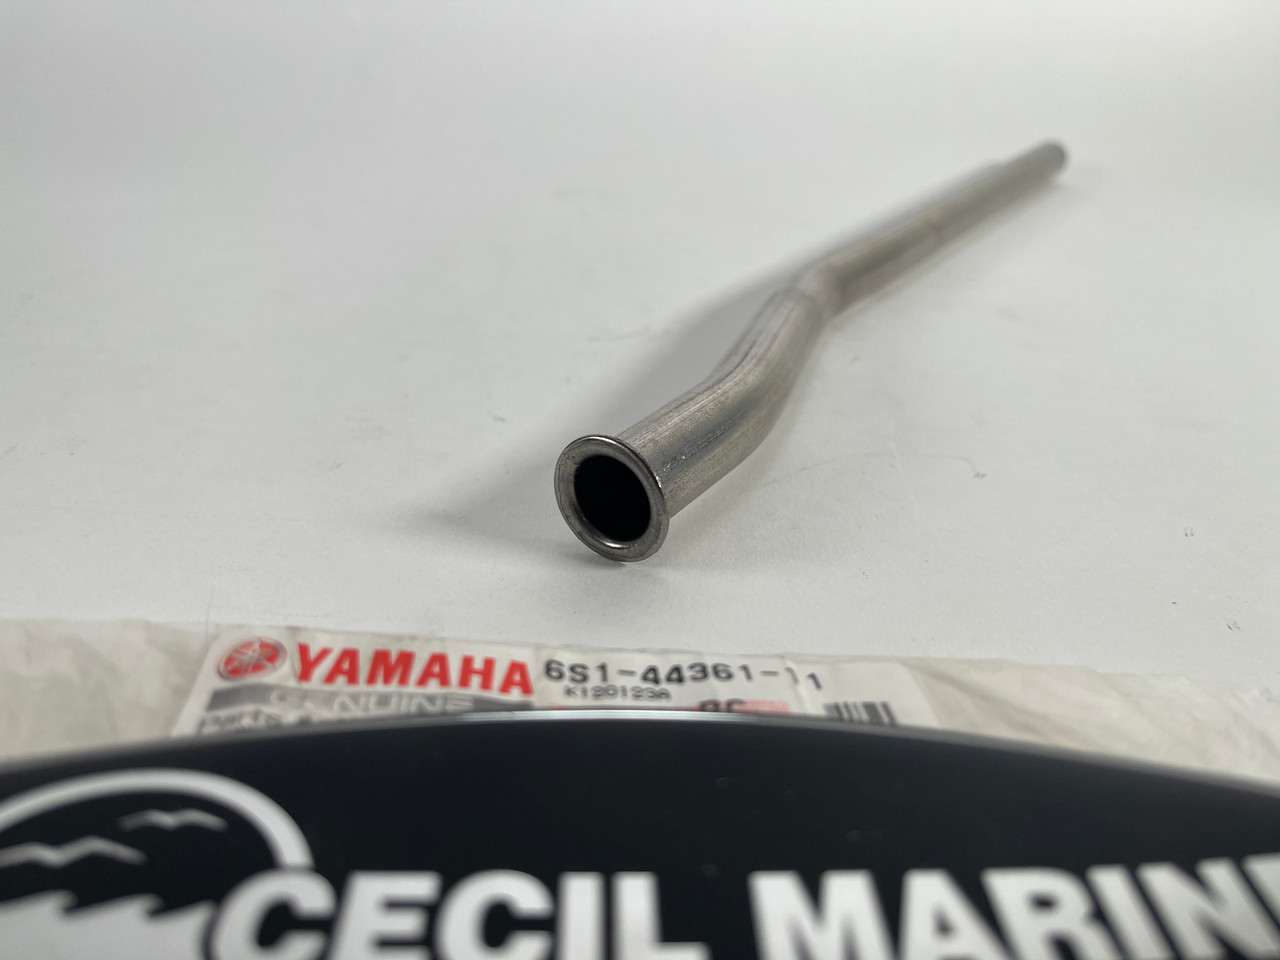 $49.35 GENUINE YAMAHA no tax* 6S1443611200 In Stock And Ready To Ship!